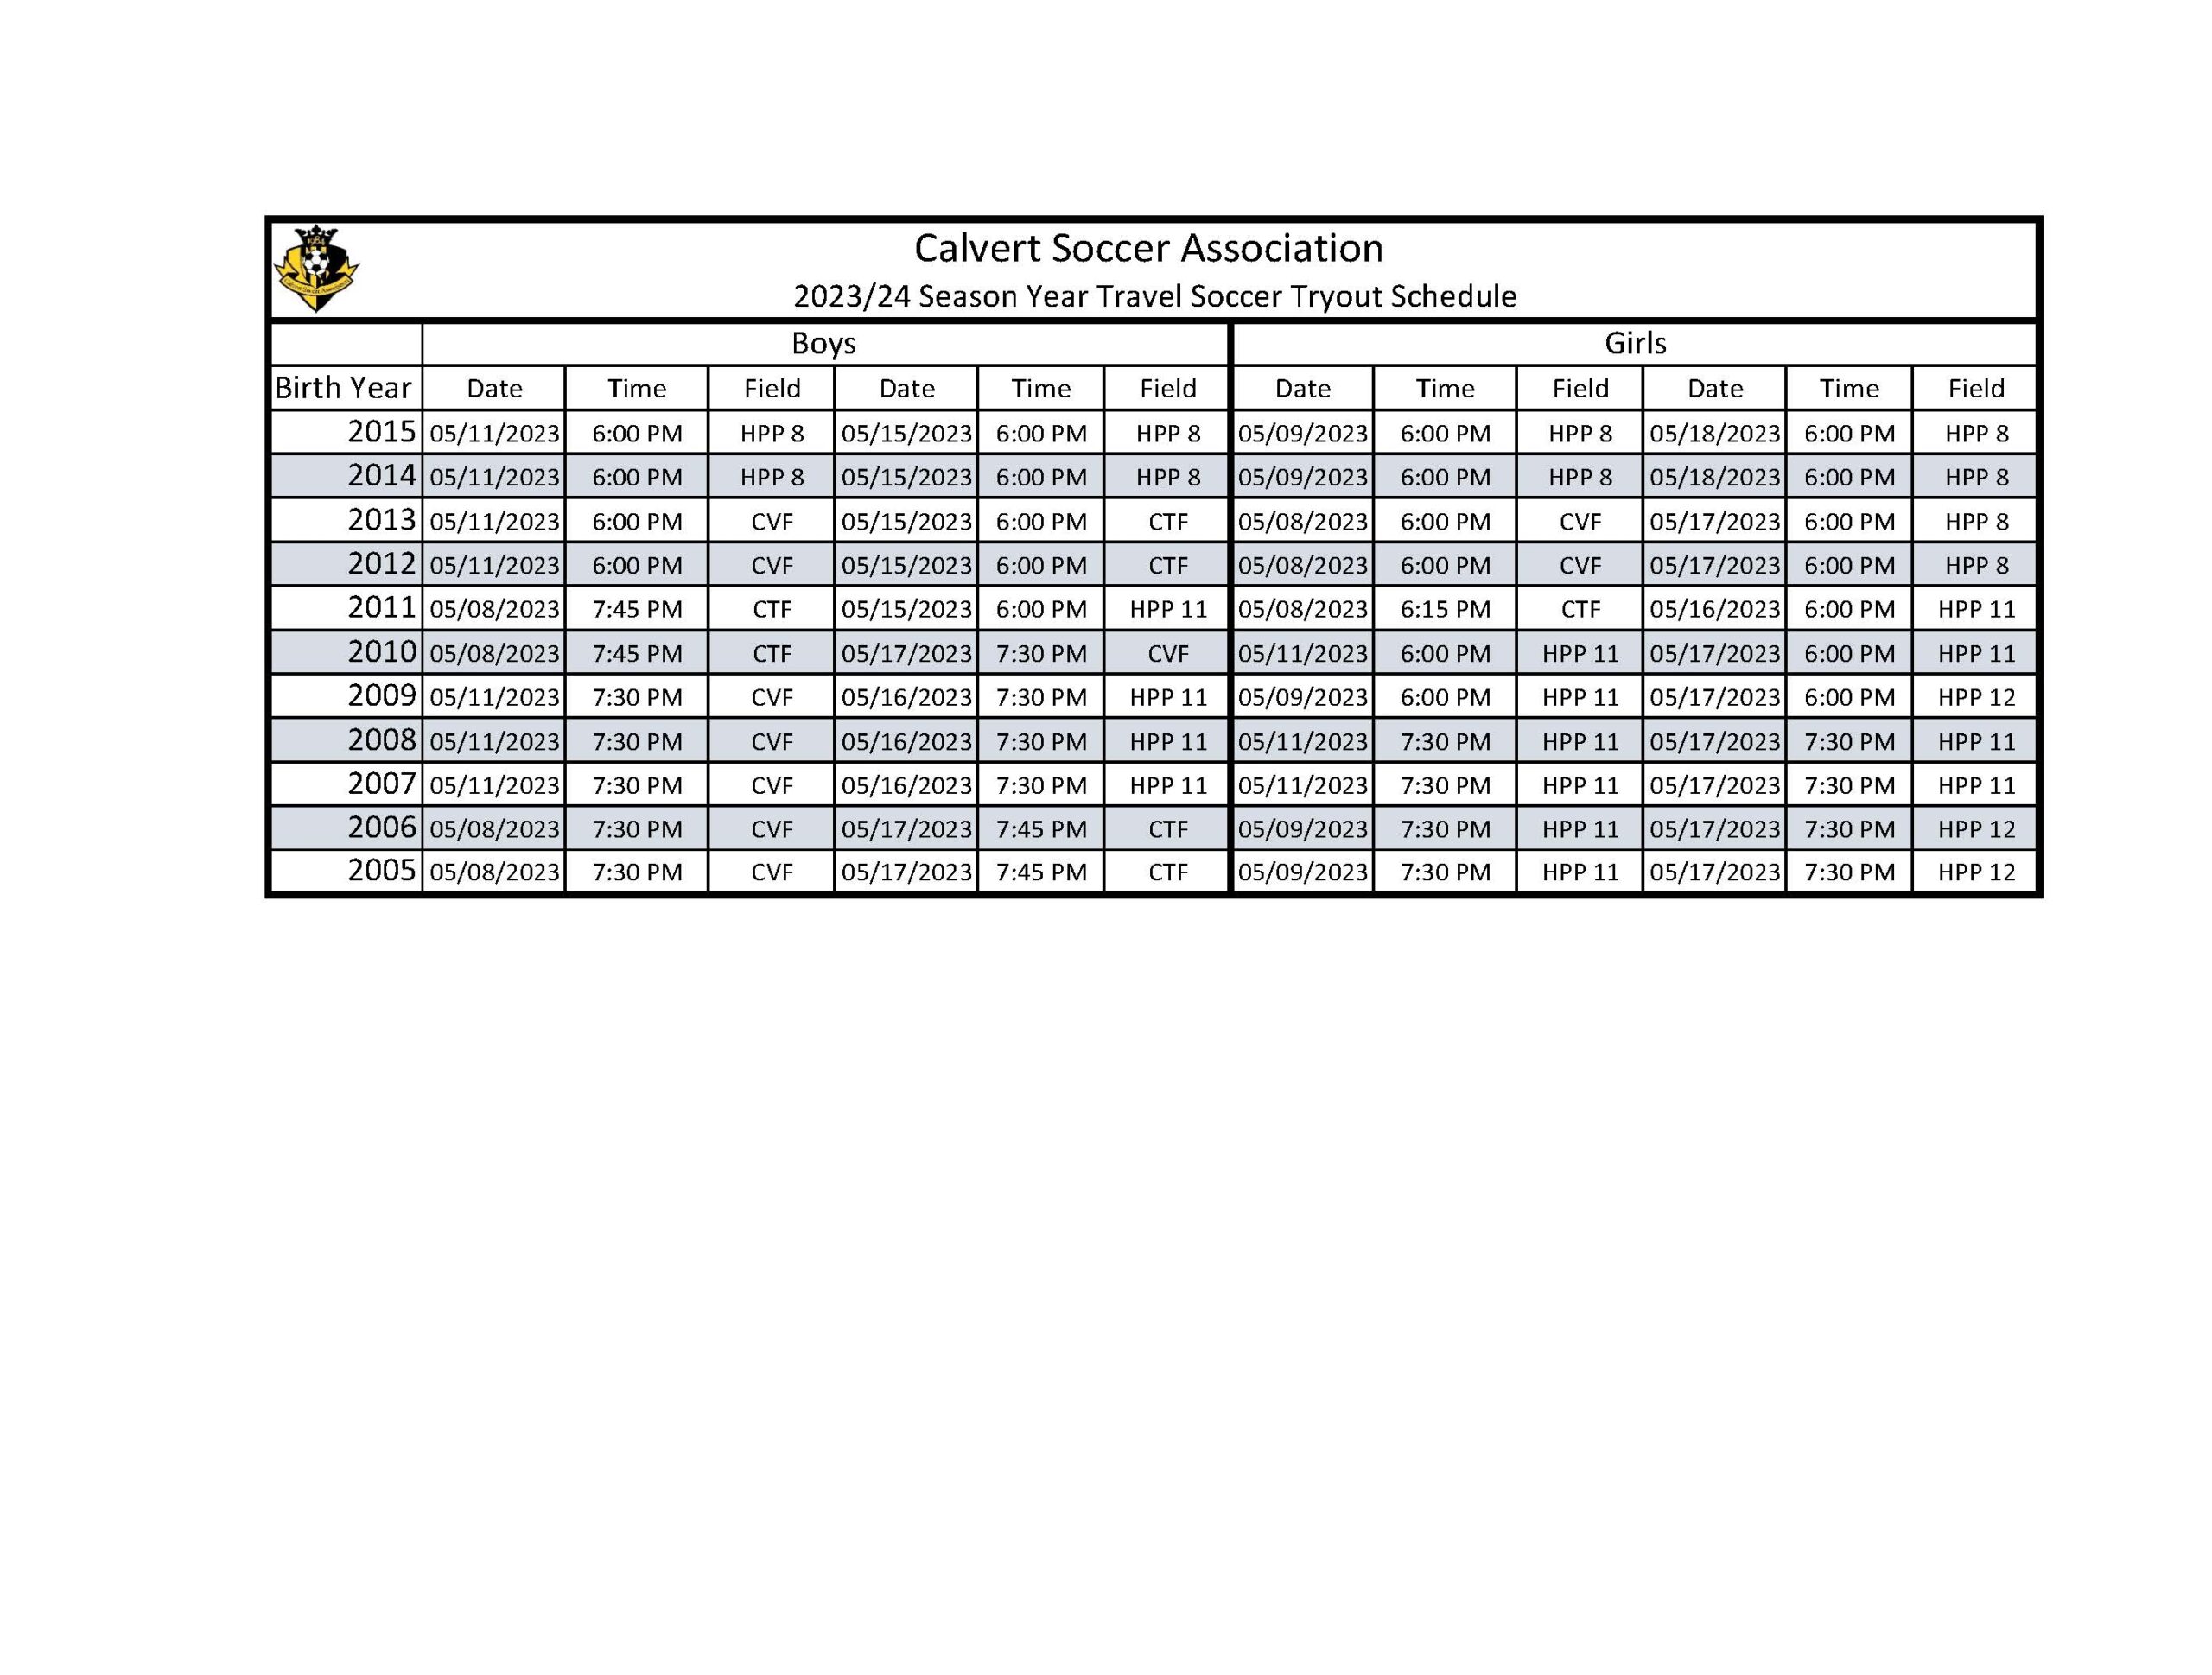 CSA 23-24 Travel Tryout Schedule